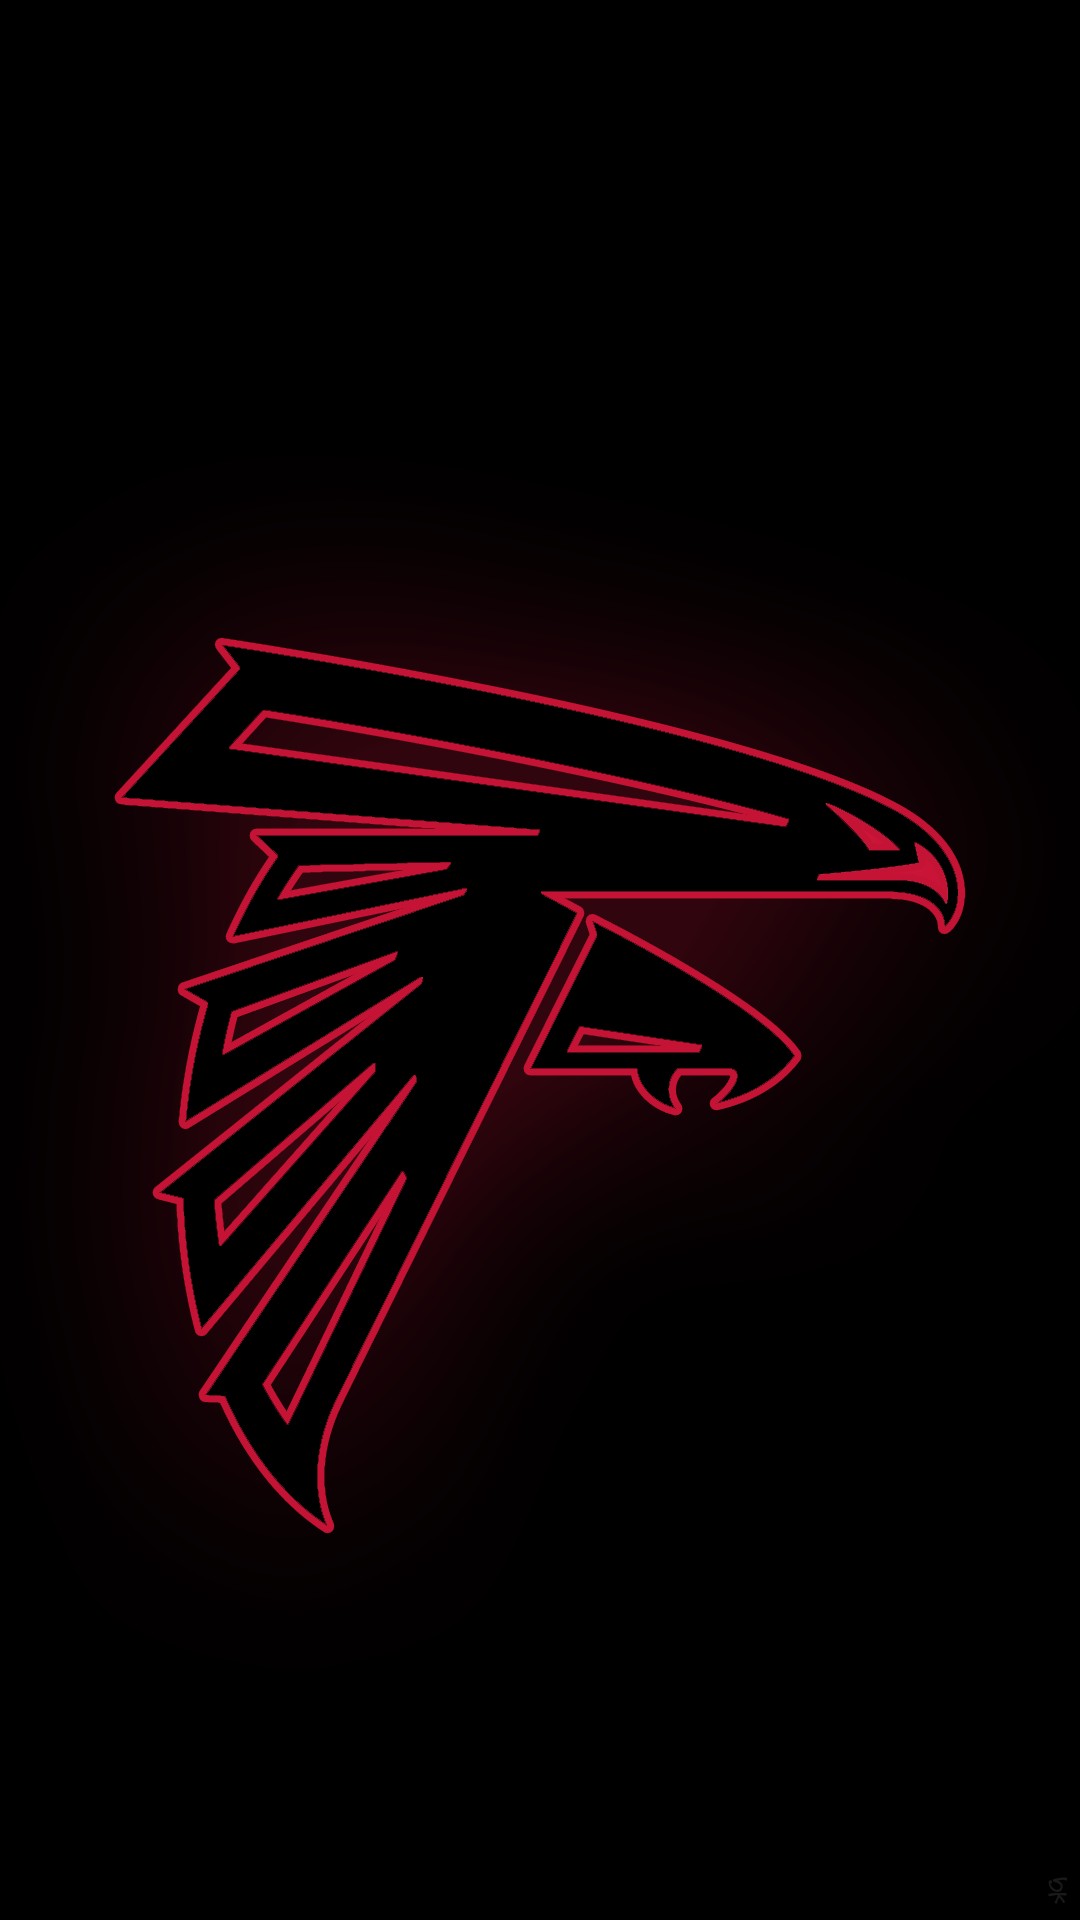 Screensaver iPhone Atlanta Falcons with high-resolution 1080x1920 pixel. Donwload and set as wallpaper for your iPhone X, iPhone XS home screen backgrounds, XS Max, XR, iPhone8 lock screen wallpaper, iPhone 7, 6, SE and other mobile devices